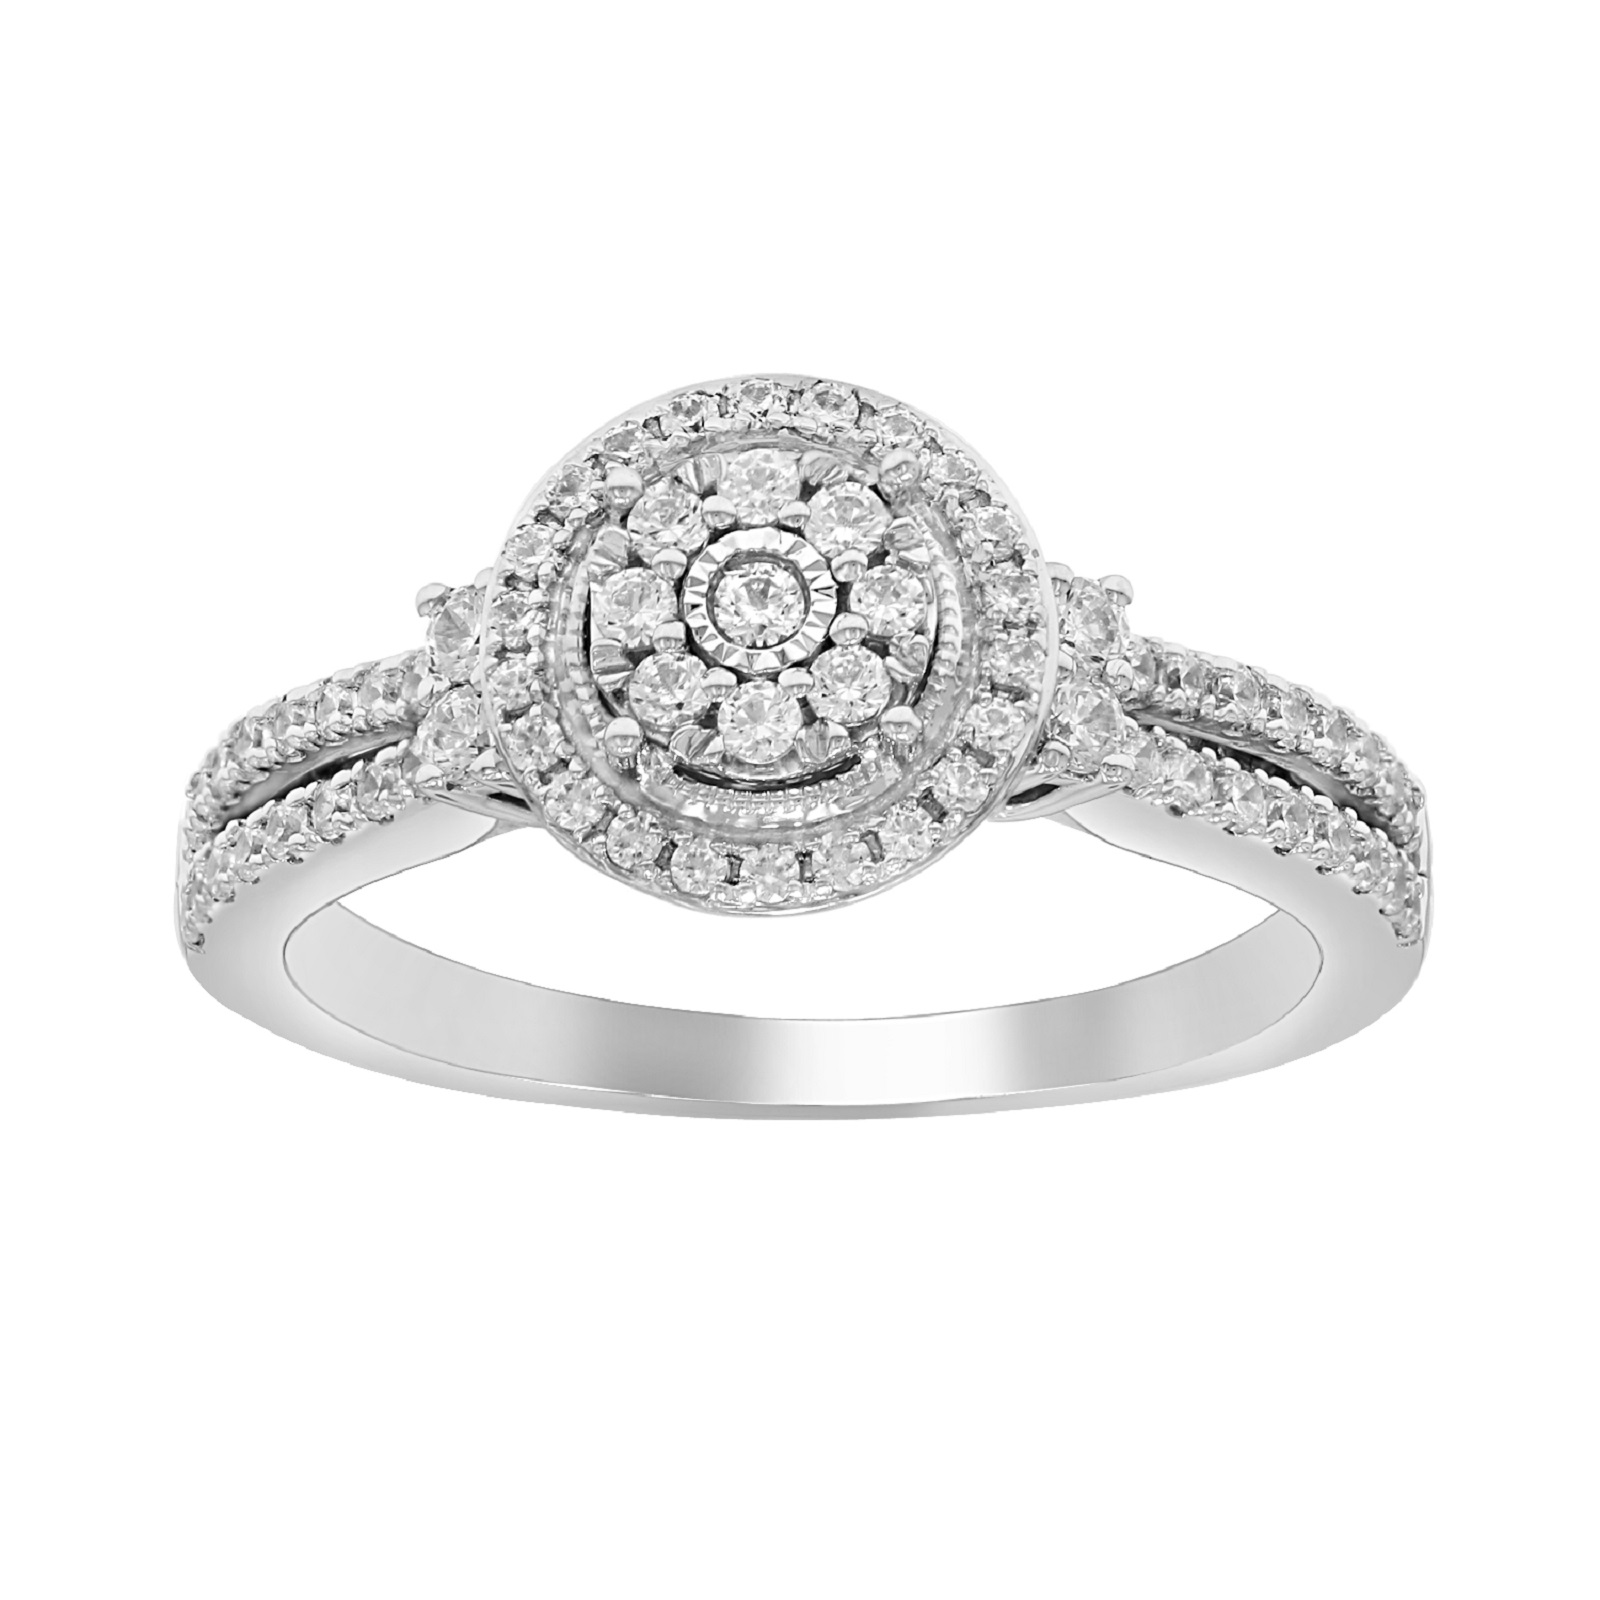 Sterling Silver 0.50CTTW Diamond Bridal Ring